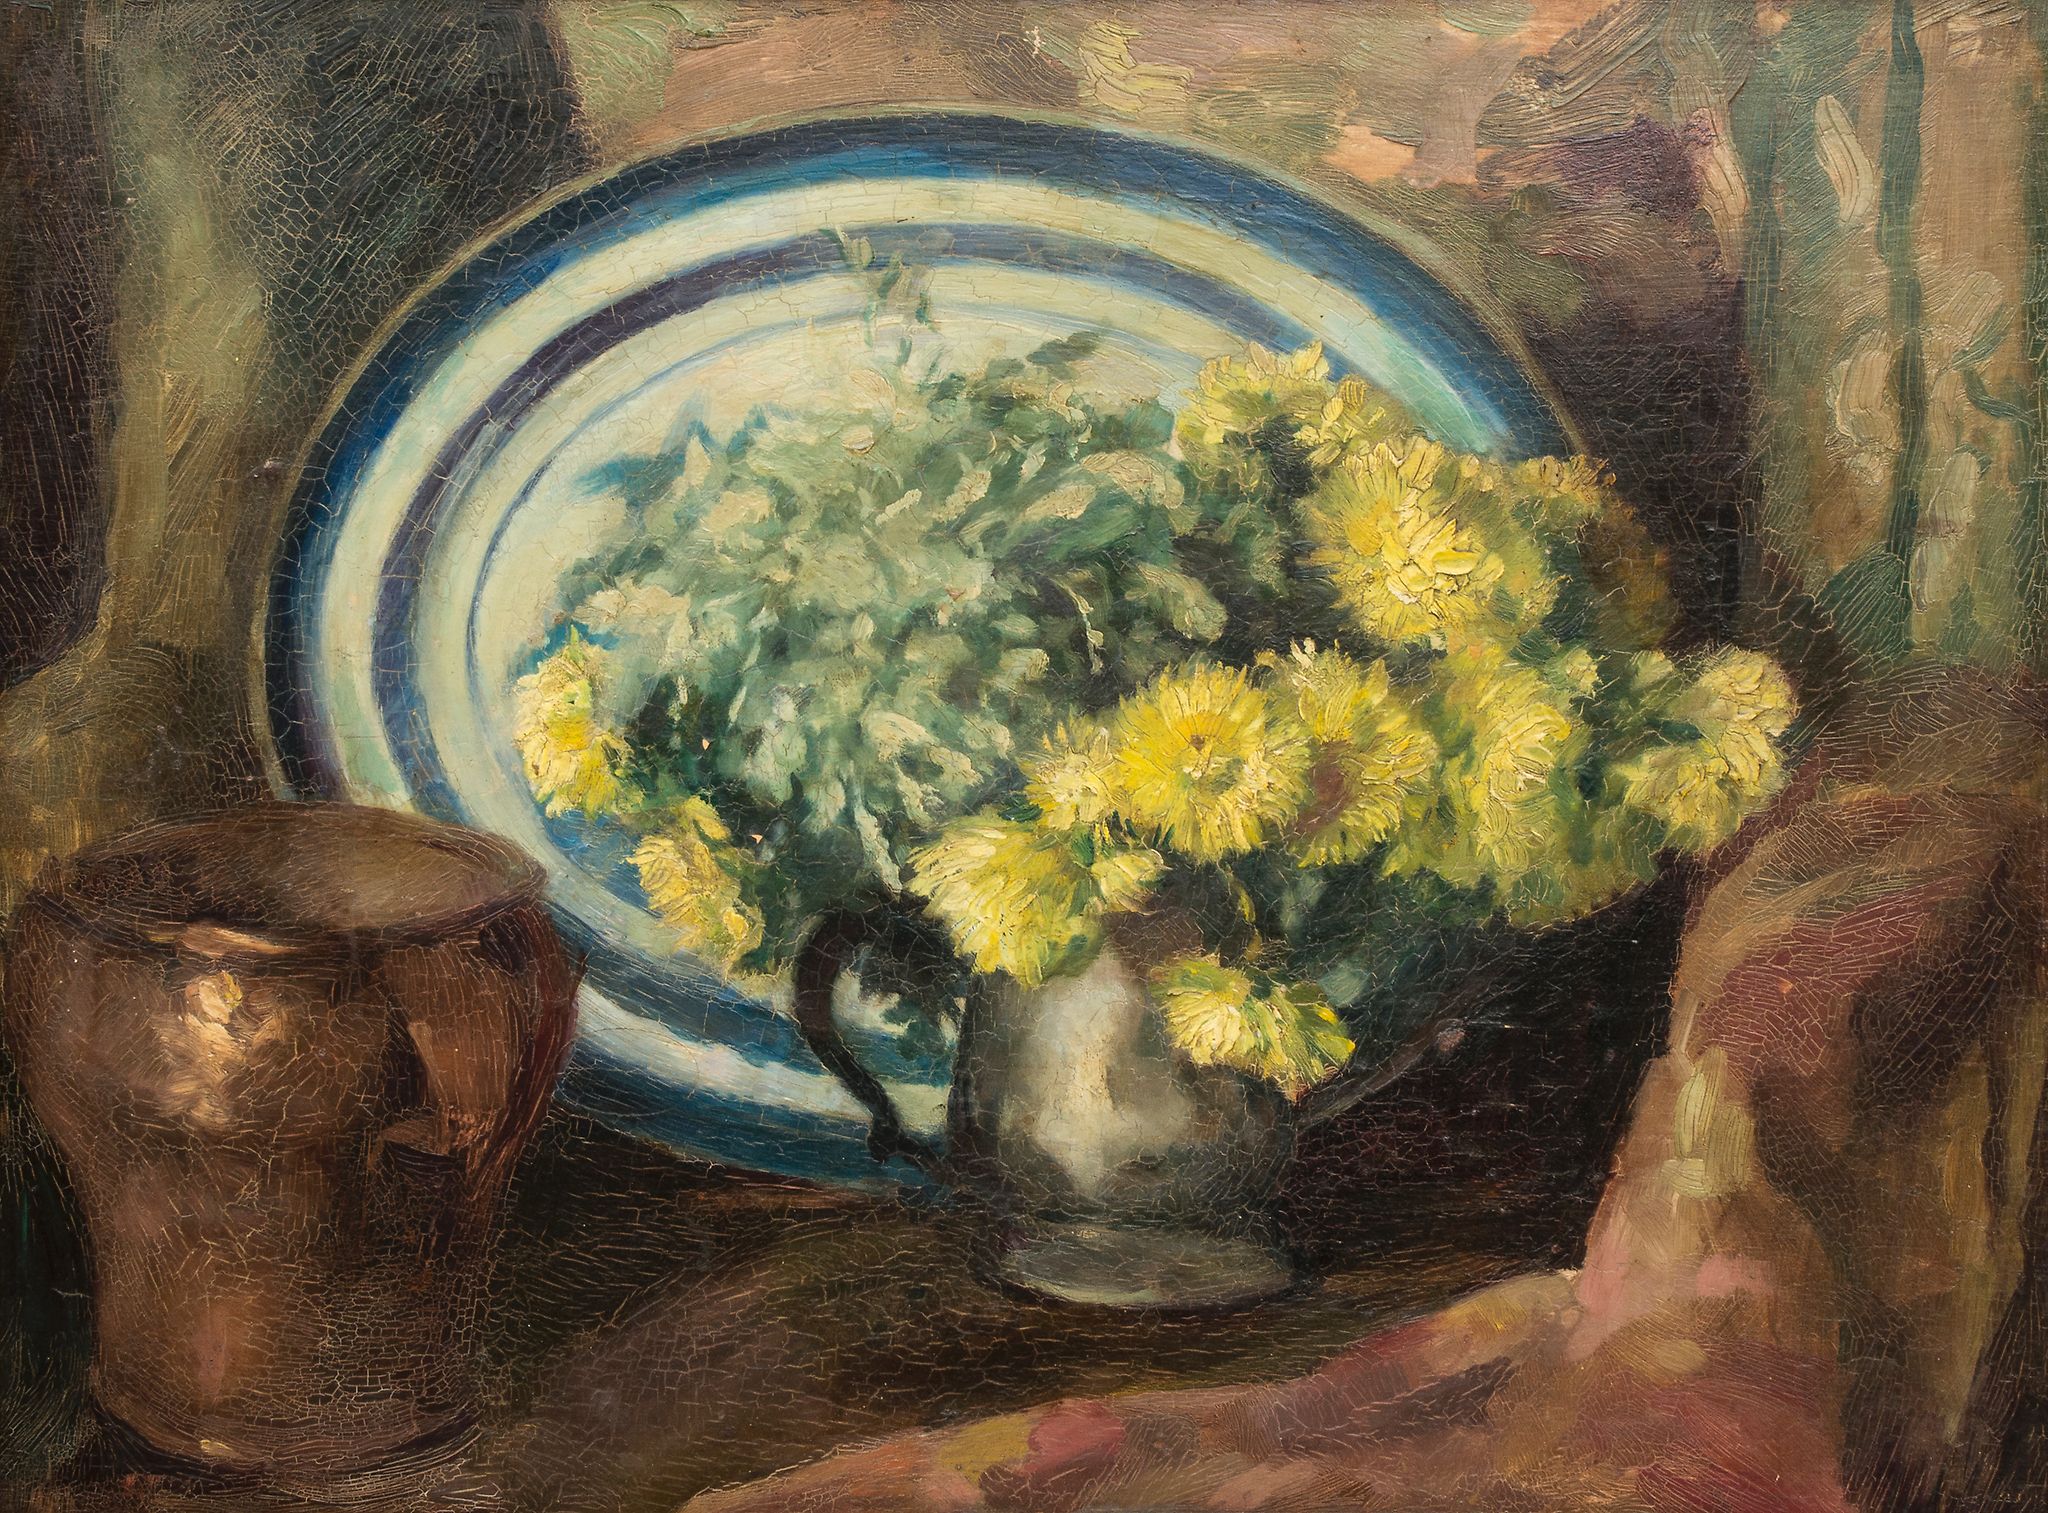 Herbert Davis Richter (1874-1955) - Still life with flowers in a vase, copper vessel and blue dish